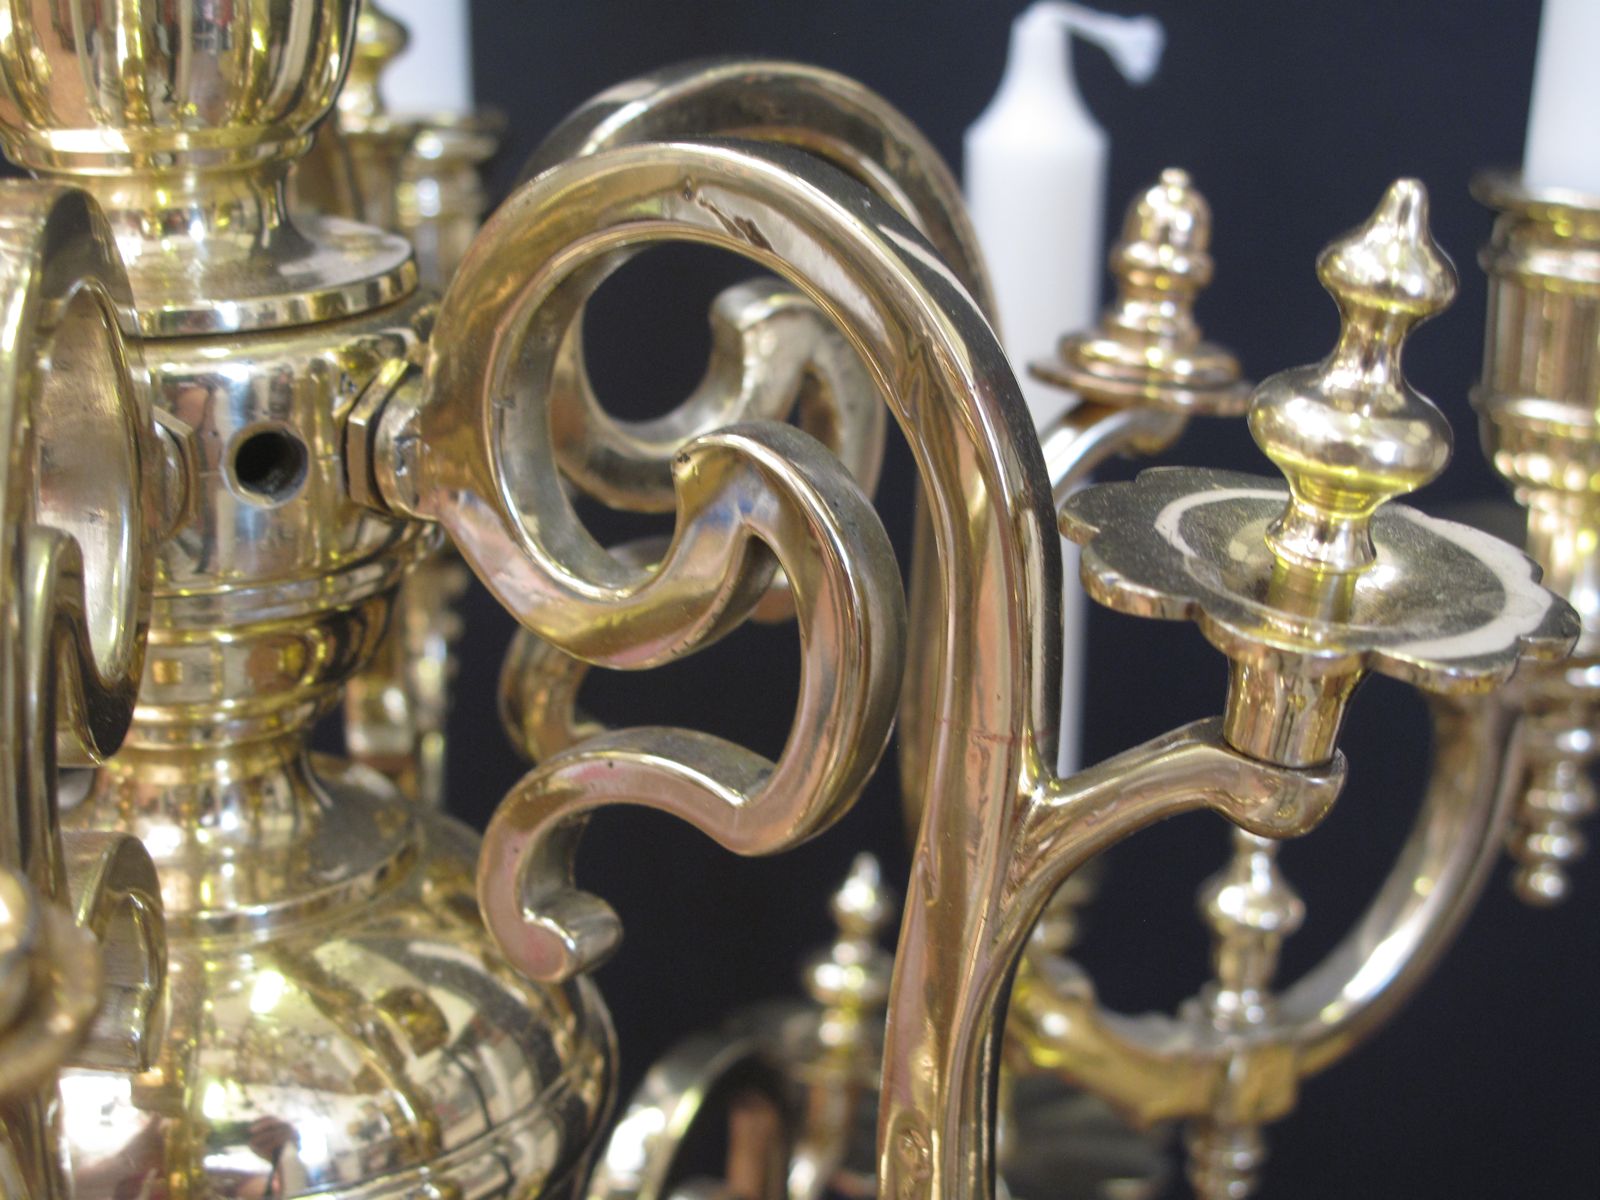 12 Arm Dutch Chandelier, polished and lacquered.